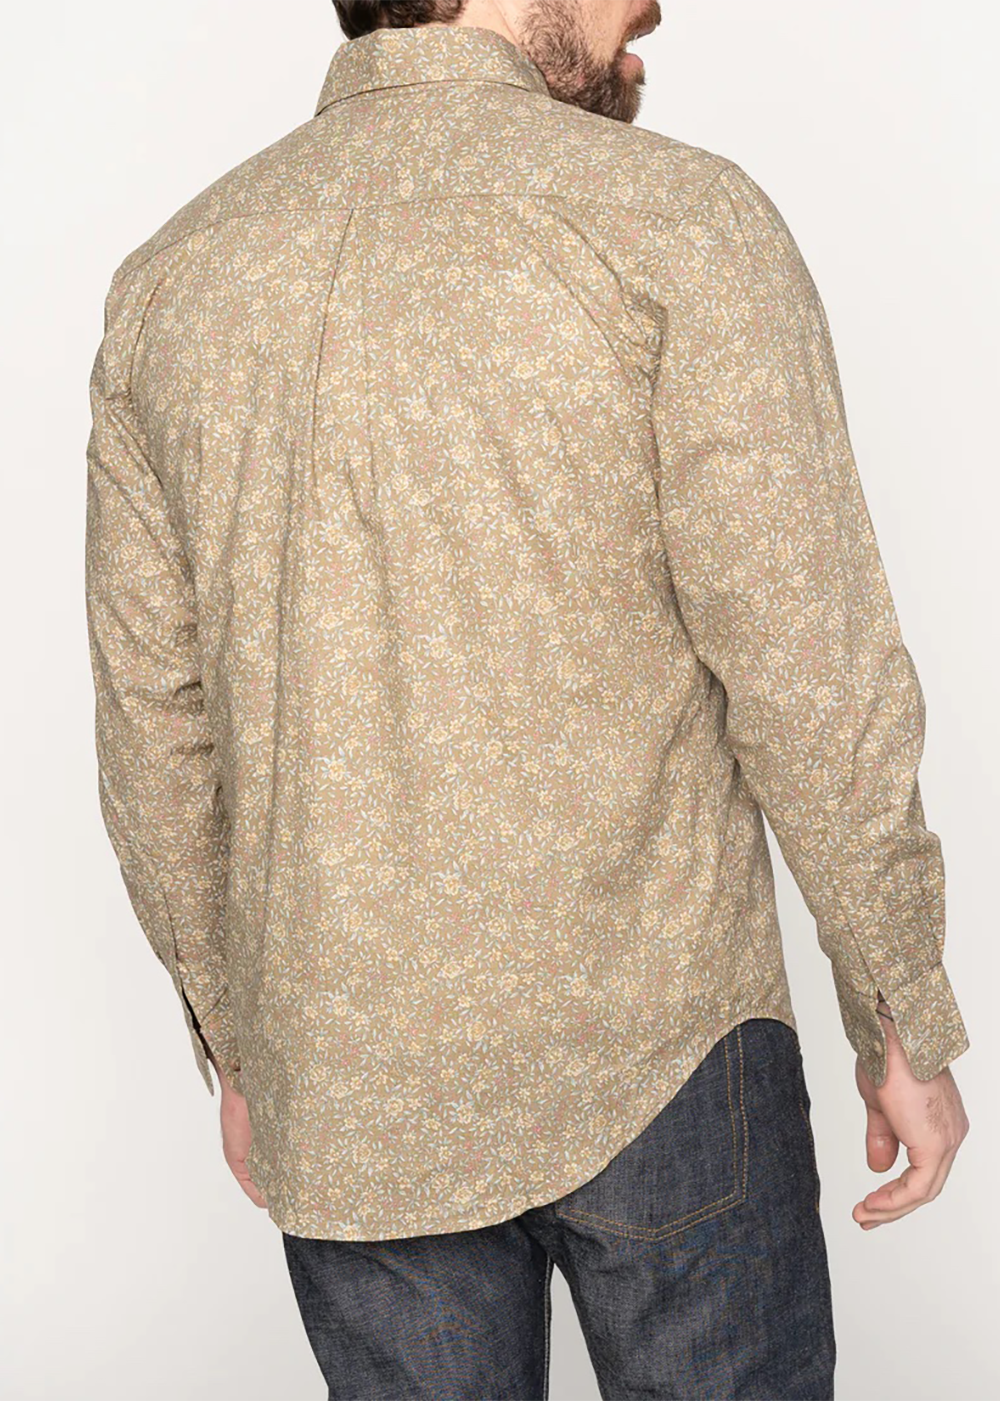 Easy Shirt - Bell Flowers - Cinnamon - Naked and Famous Denim Canada - Danali - 120118811